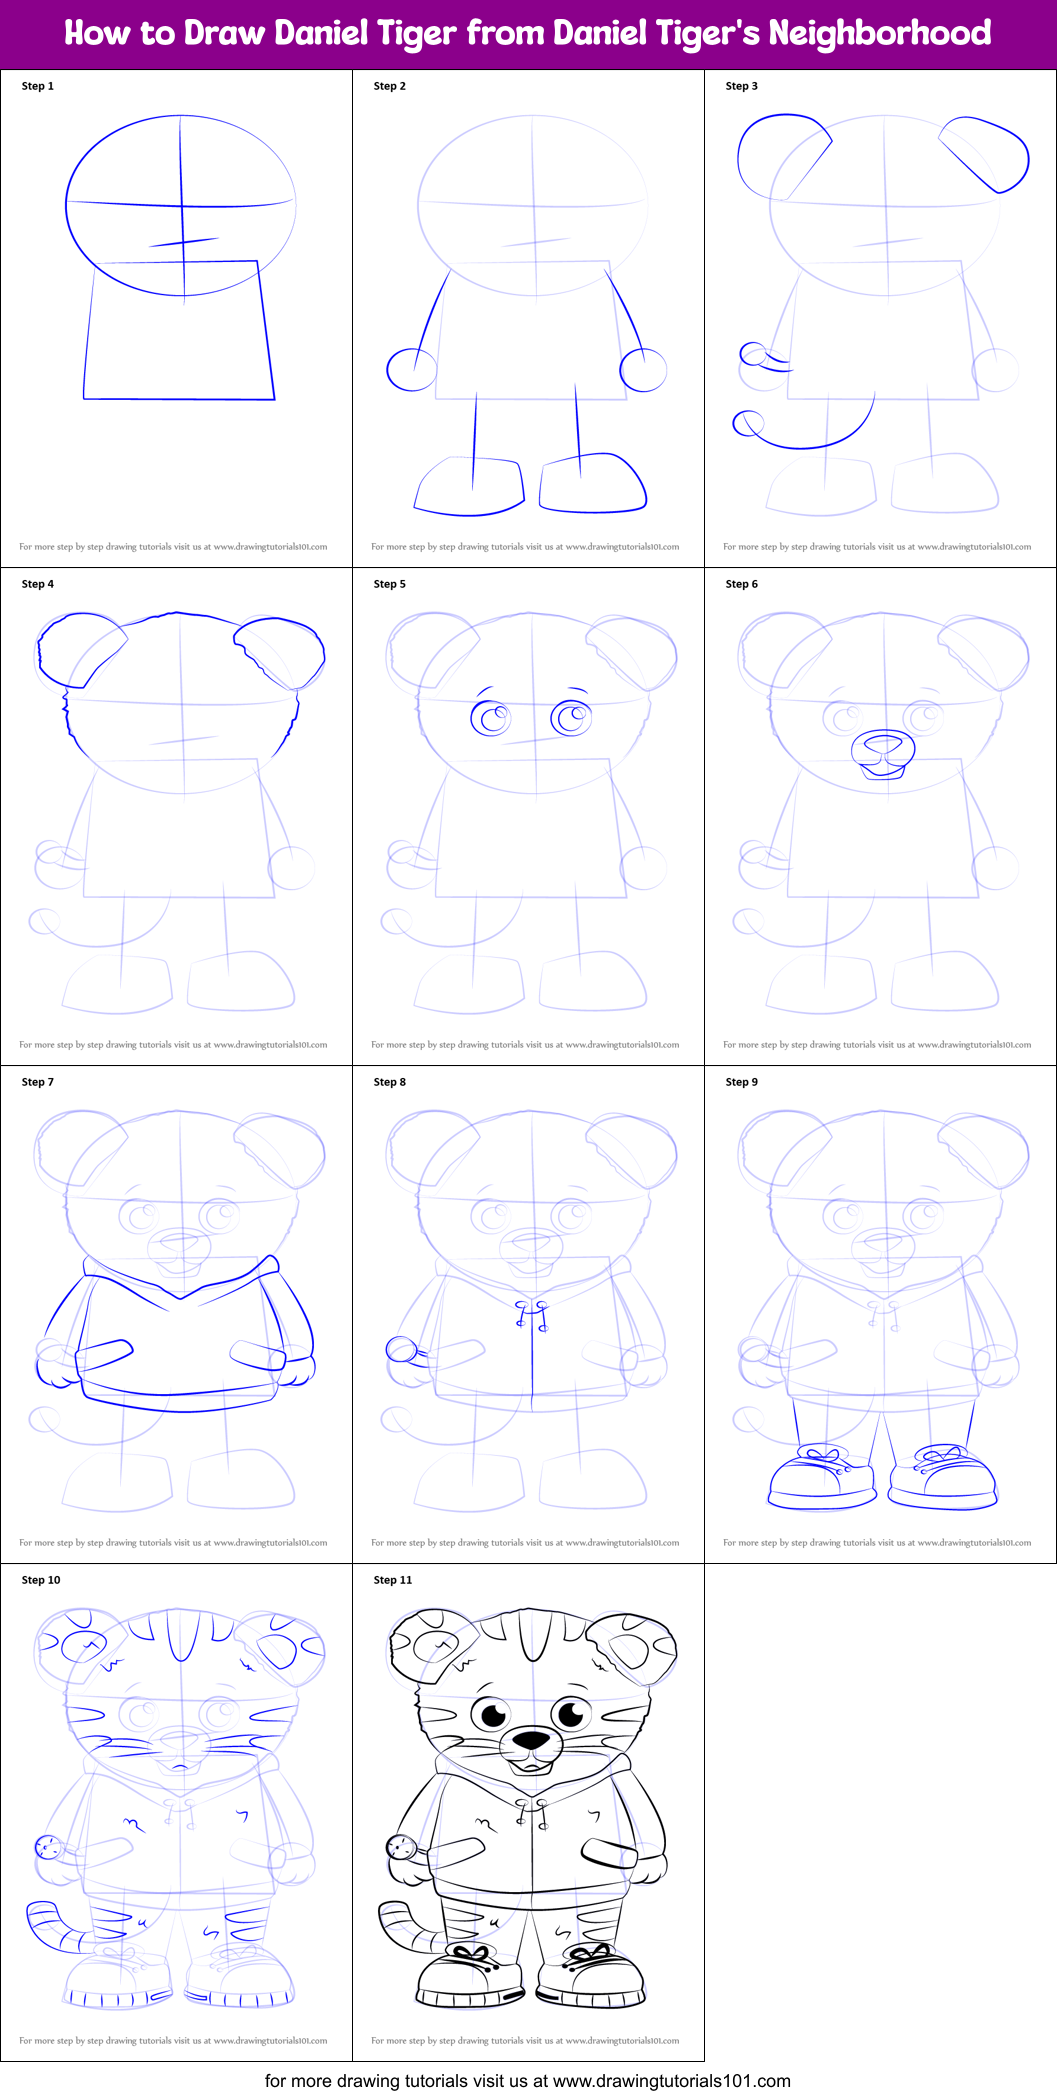 How to Draw Daniel Tiger from Daniel Tiger's Neighborhood printable